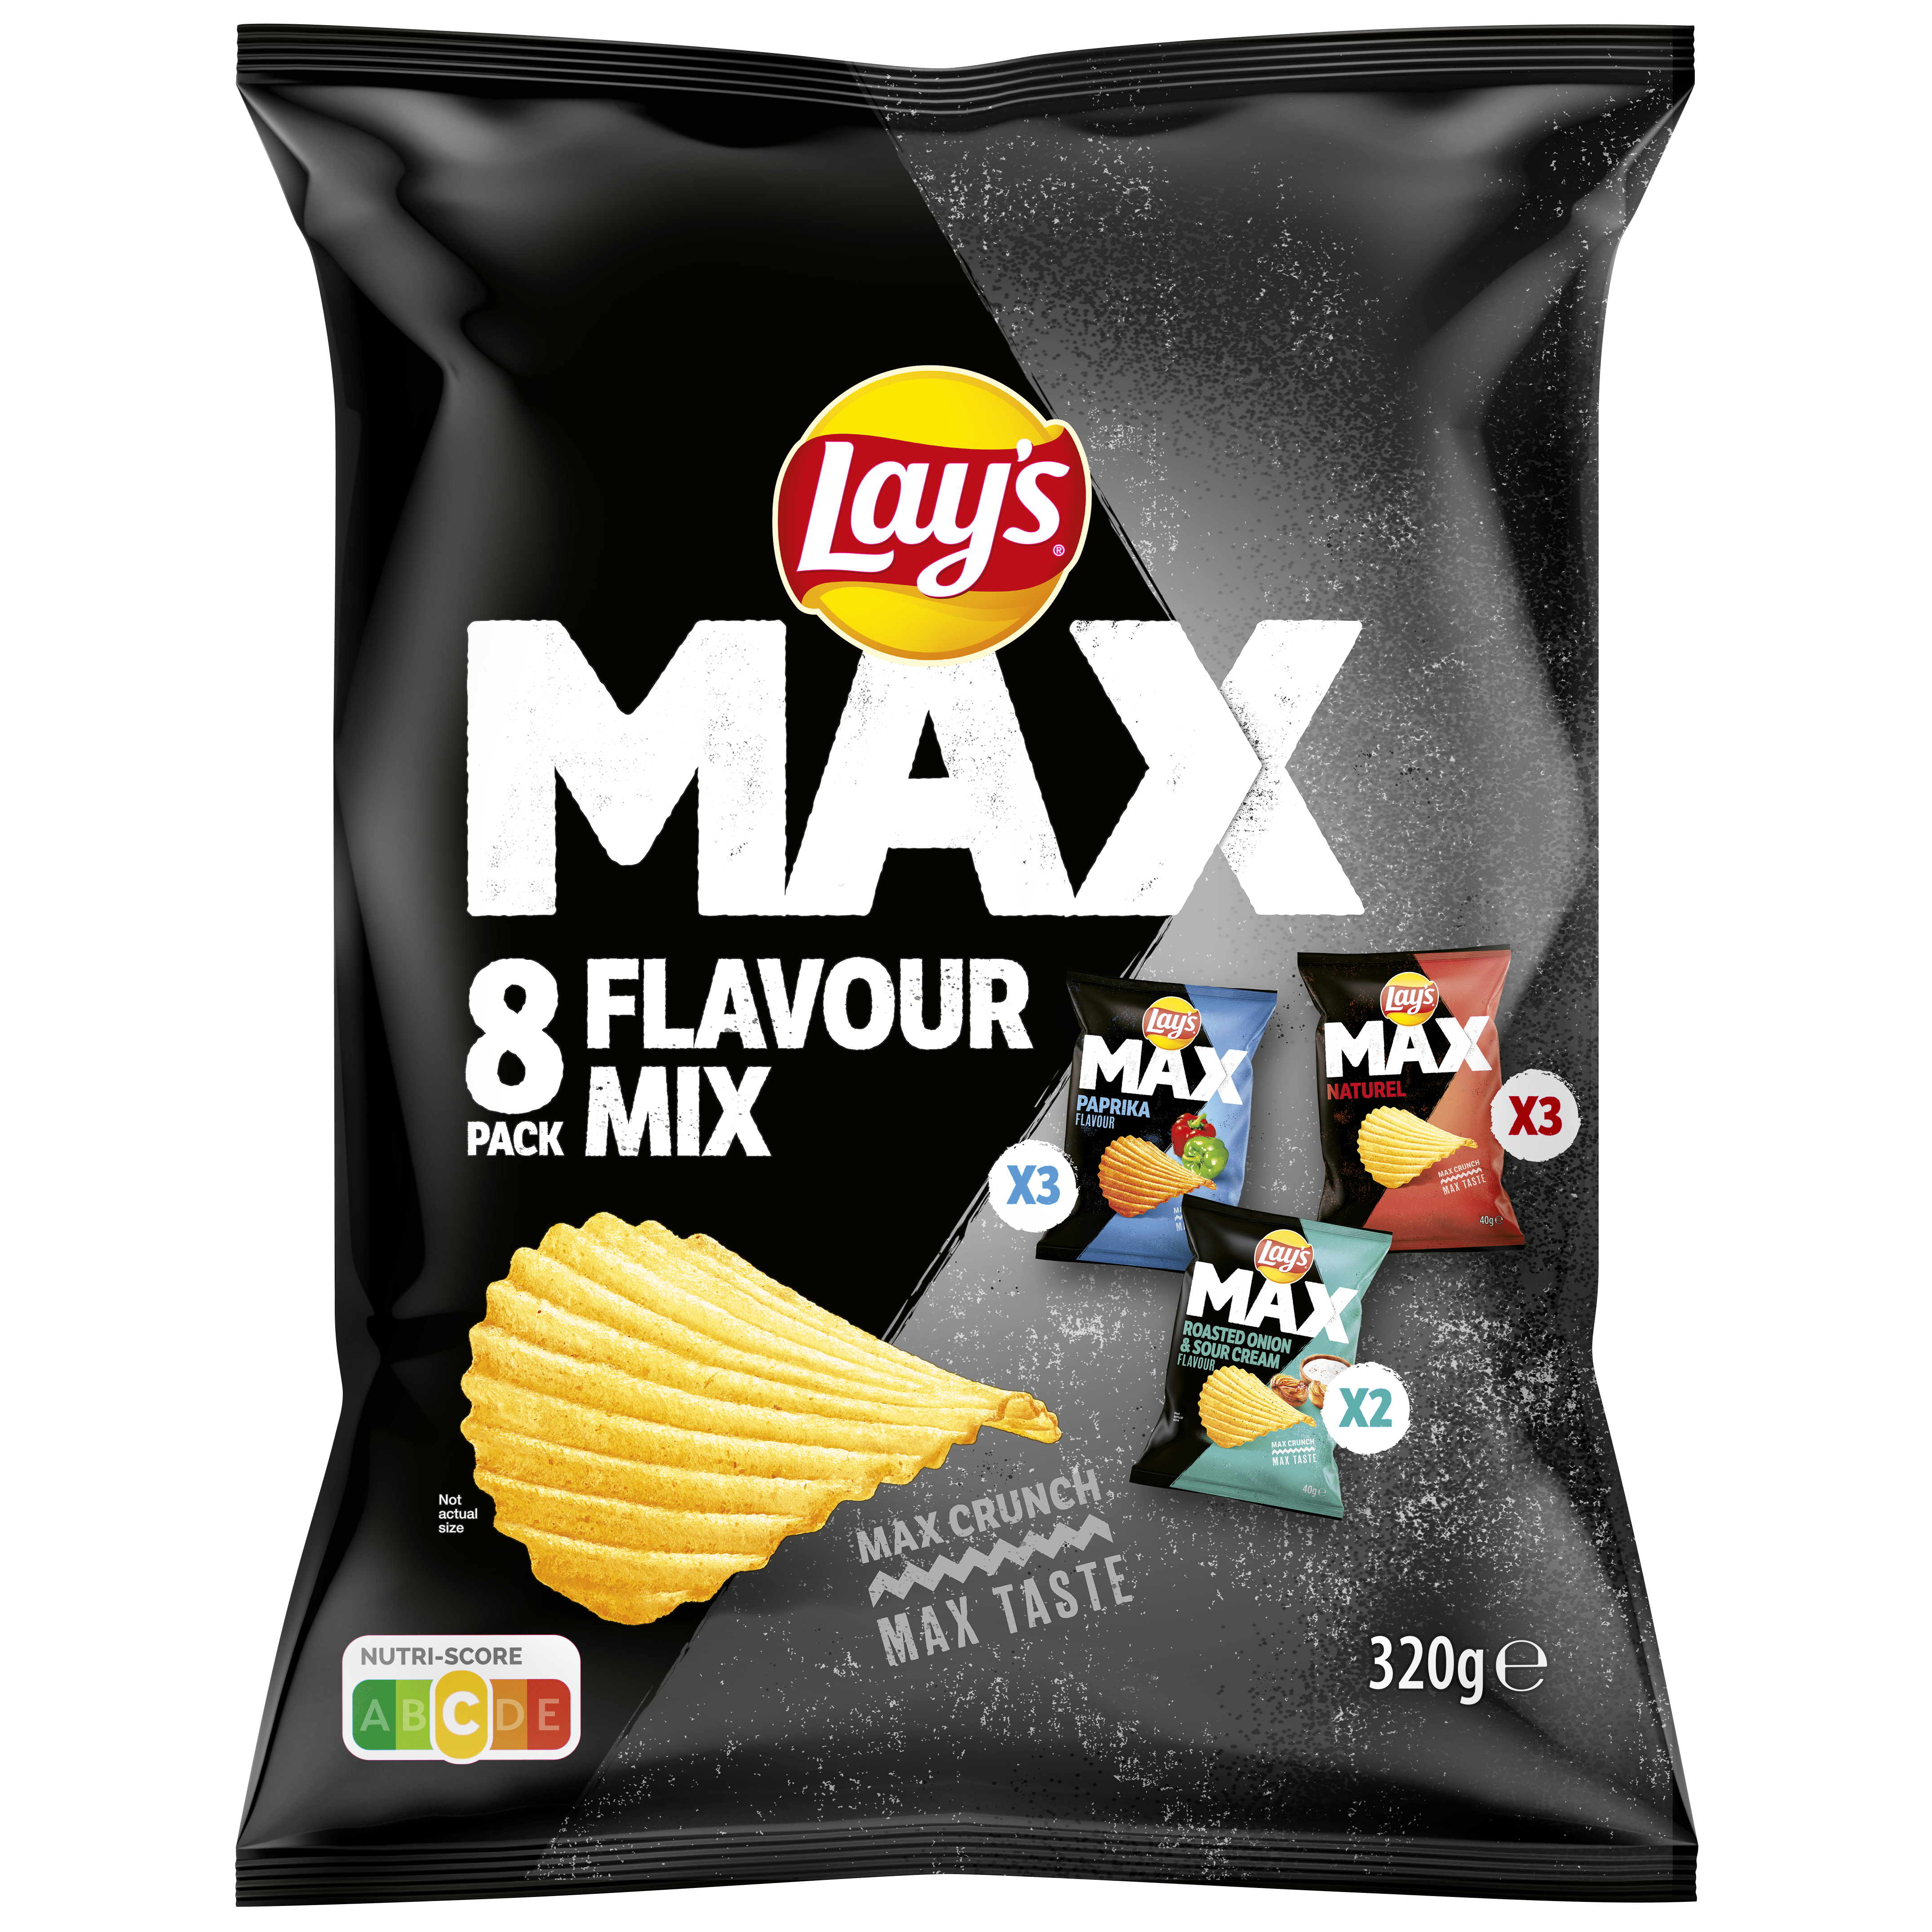 Lay's MAX Flavour Mix